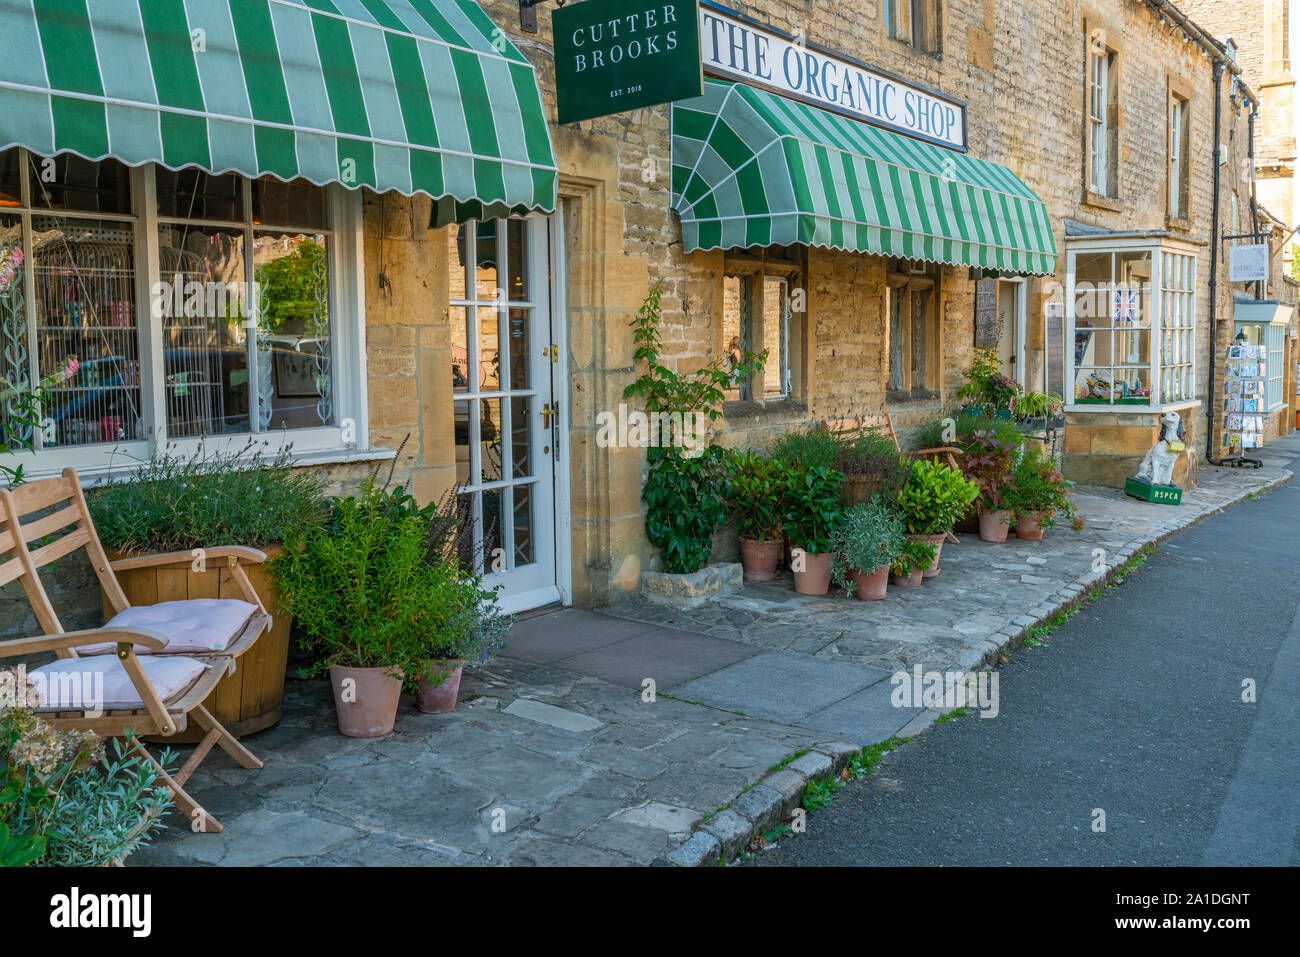 STOW-ON-THE-WOLD, UK - SEPTEMBER 21, 2019: Stow-on-the-Wold is a small market town and civil parish in Cotswolds area of Gloucestershire Stock Photo